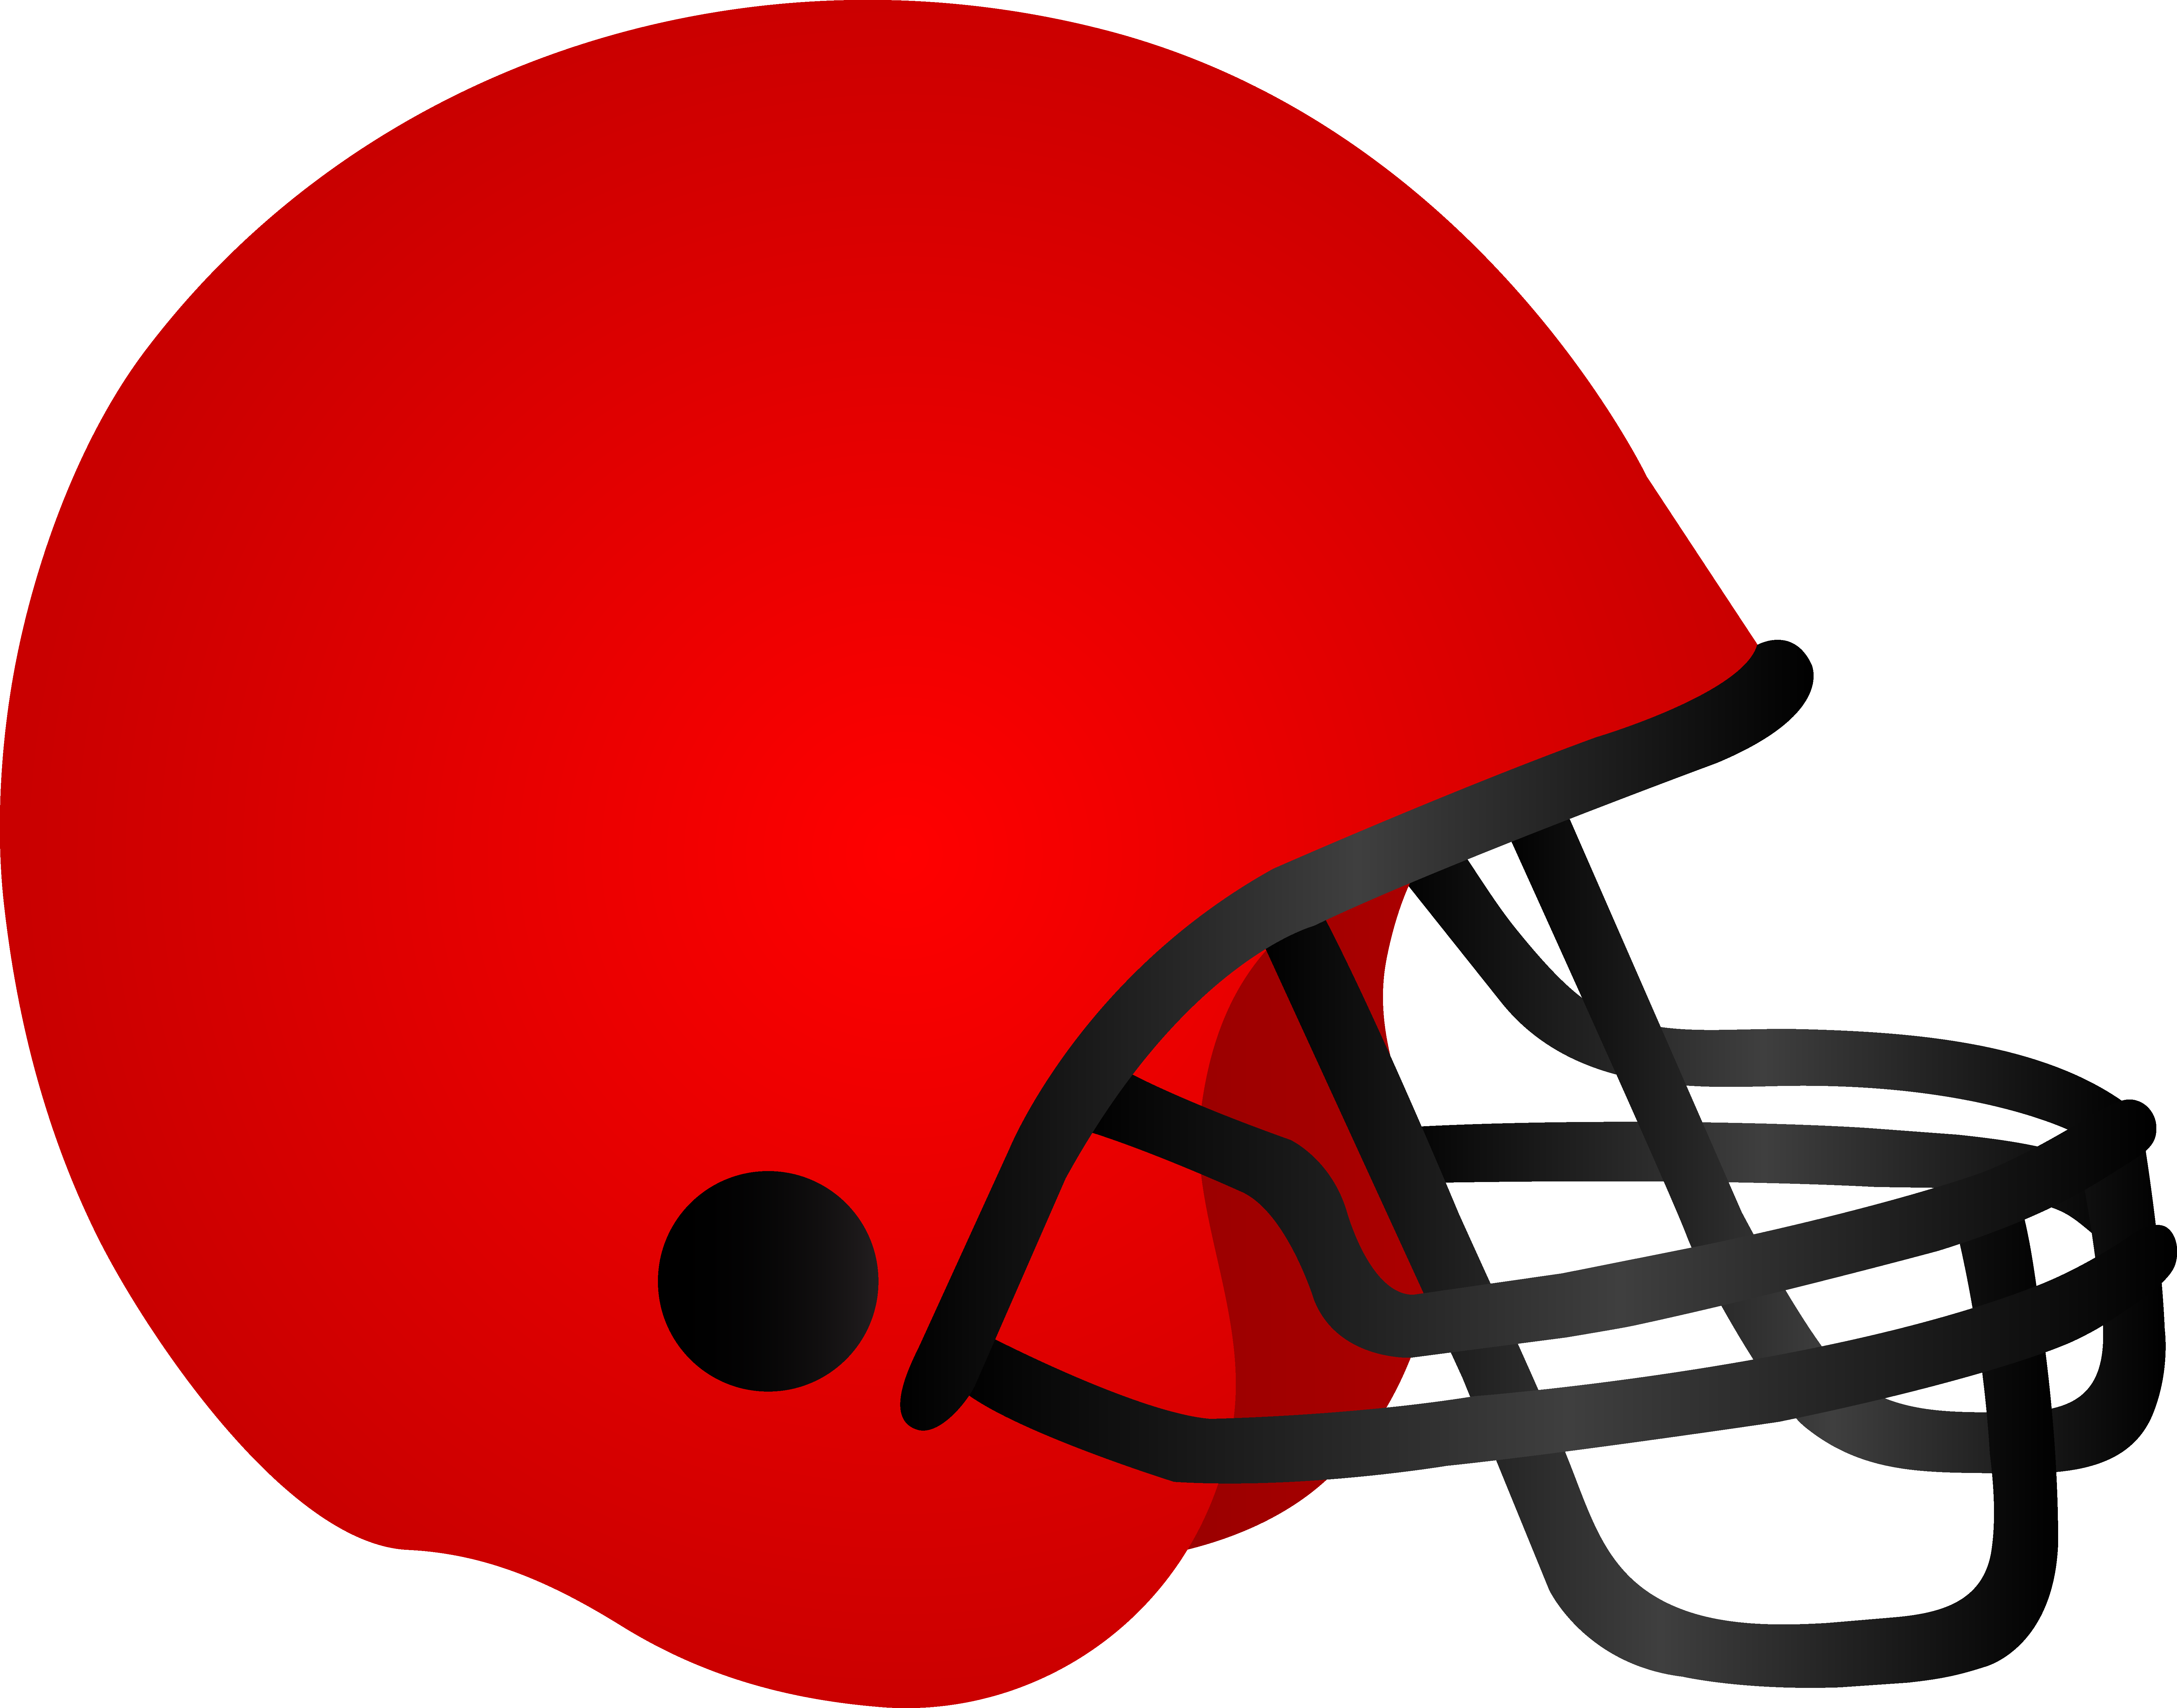 football clipart download - photo #31